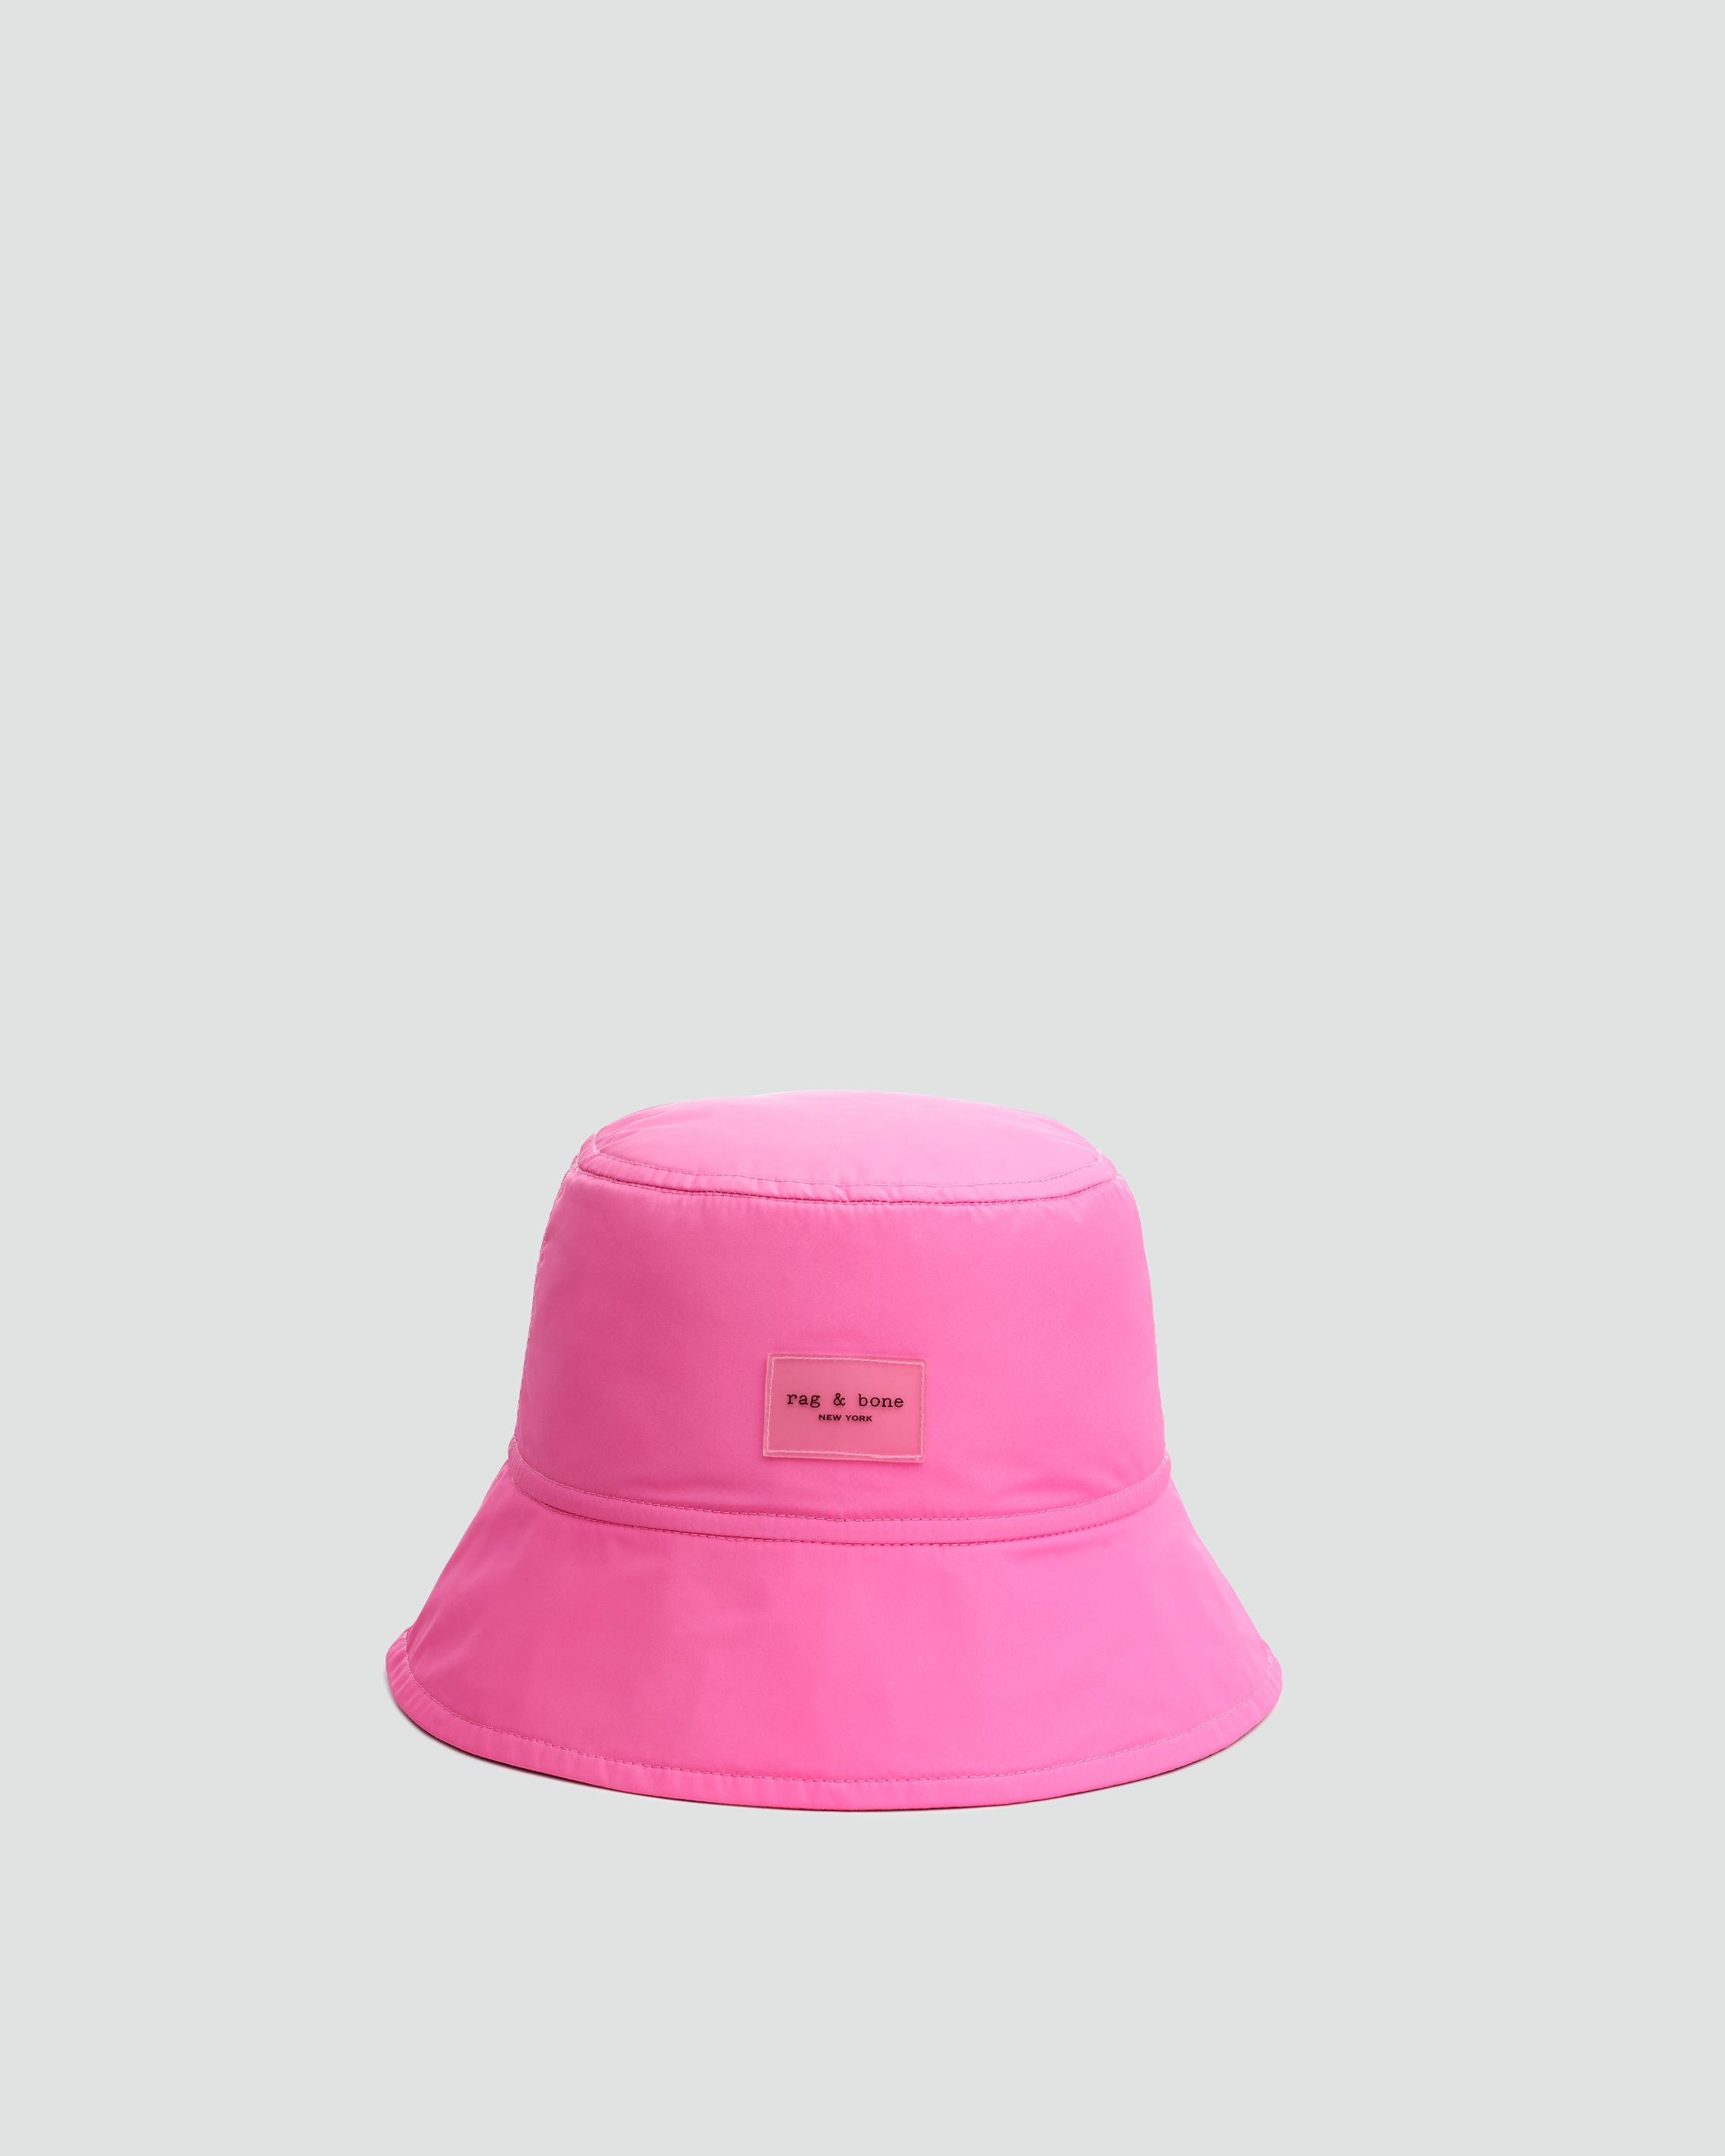 Addison Bucket Hat
Recycled Materials Hat - 1